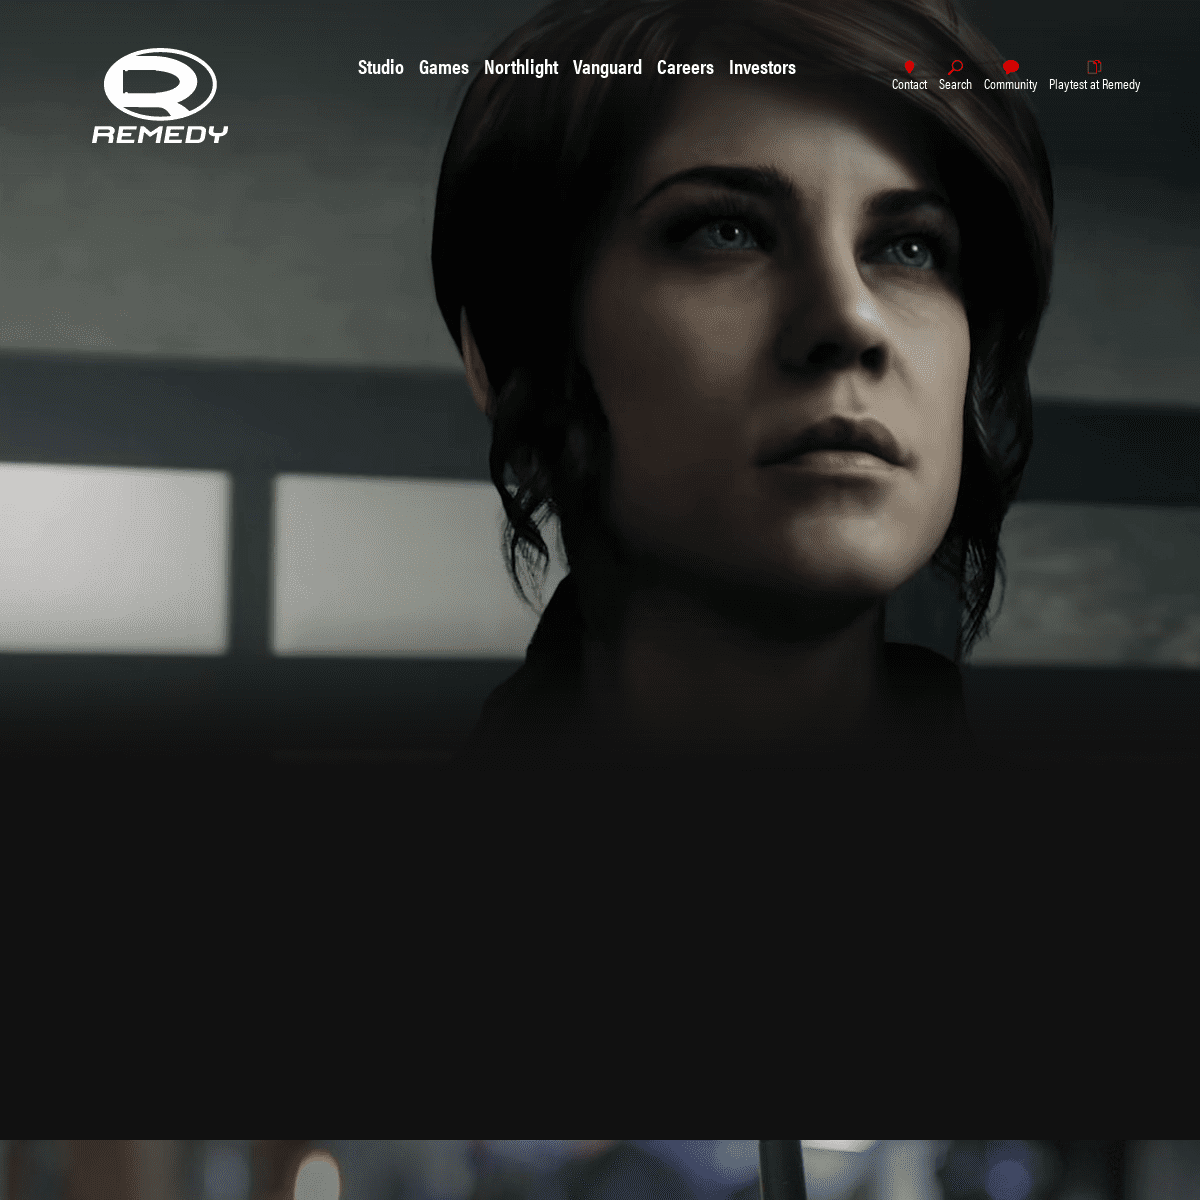 A complete backup of https://remedygames.com